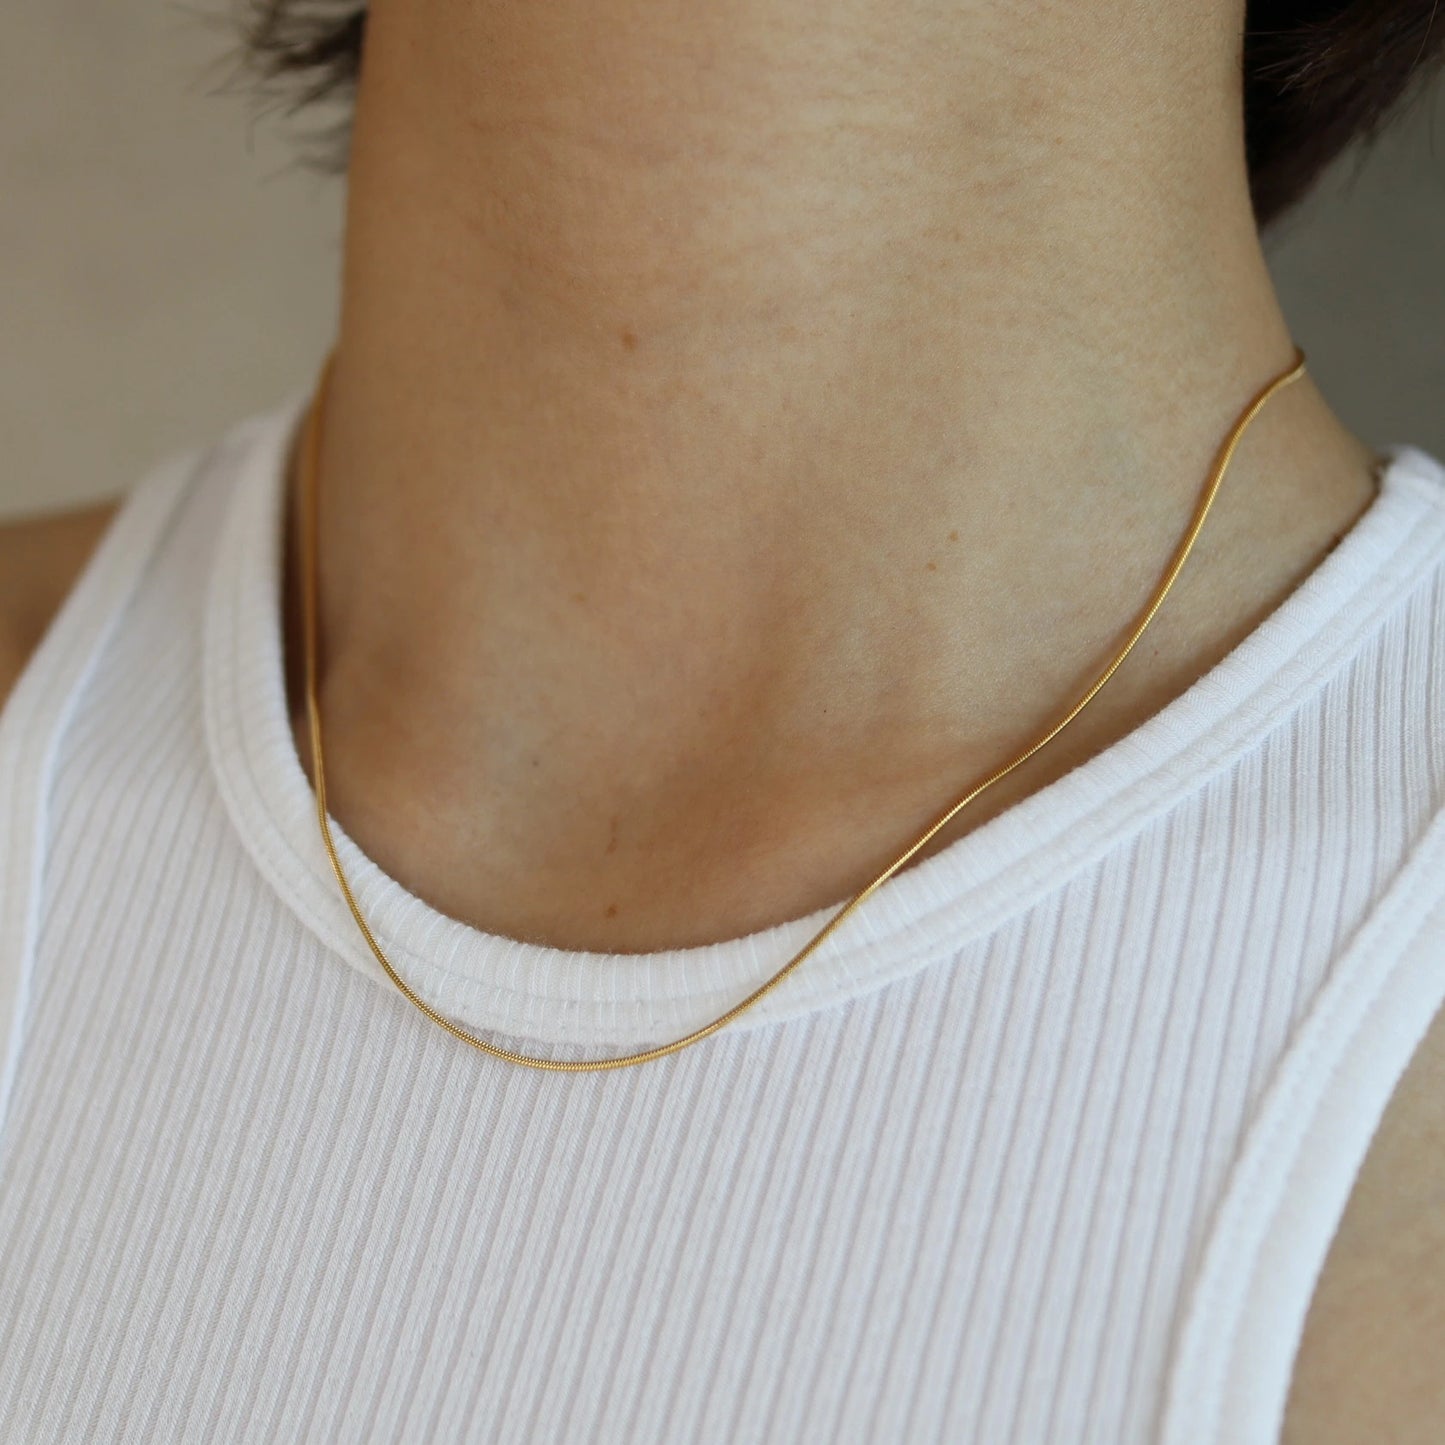 N168 stainless simple snake chain necklace